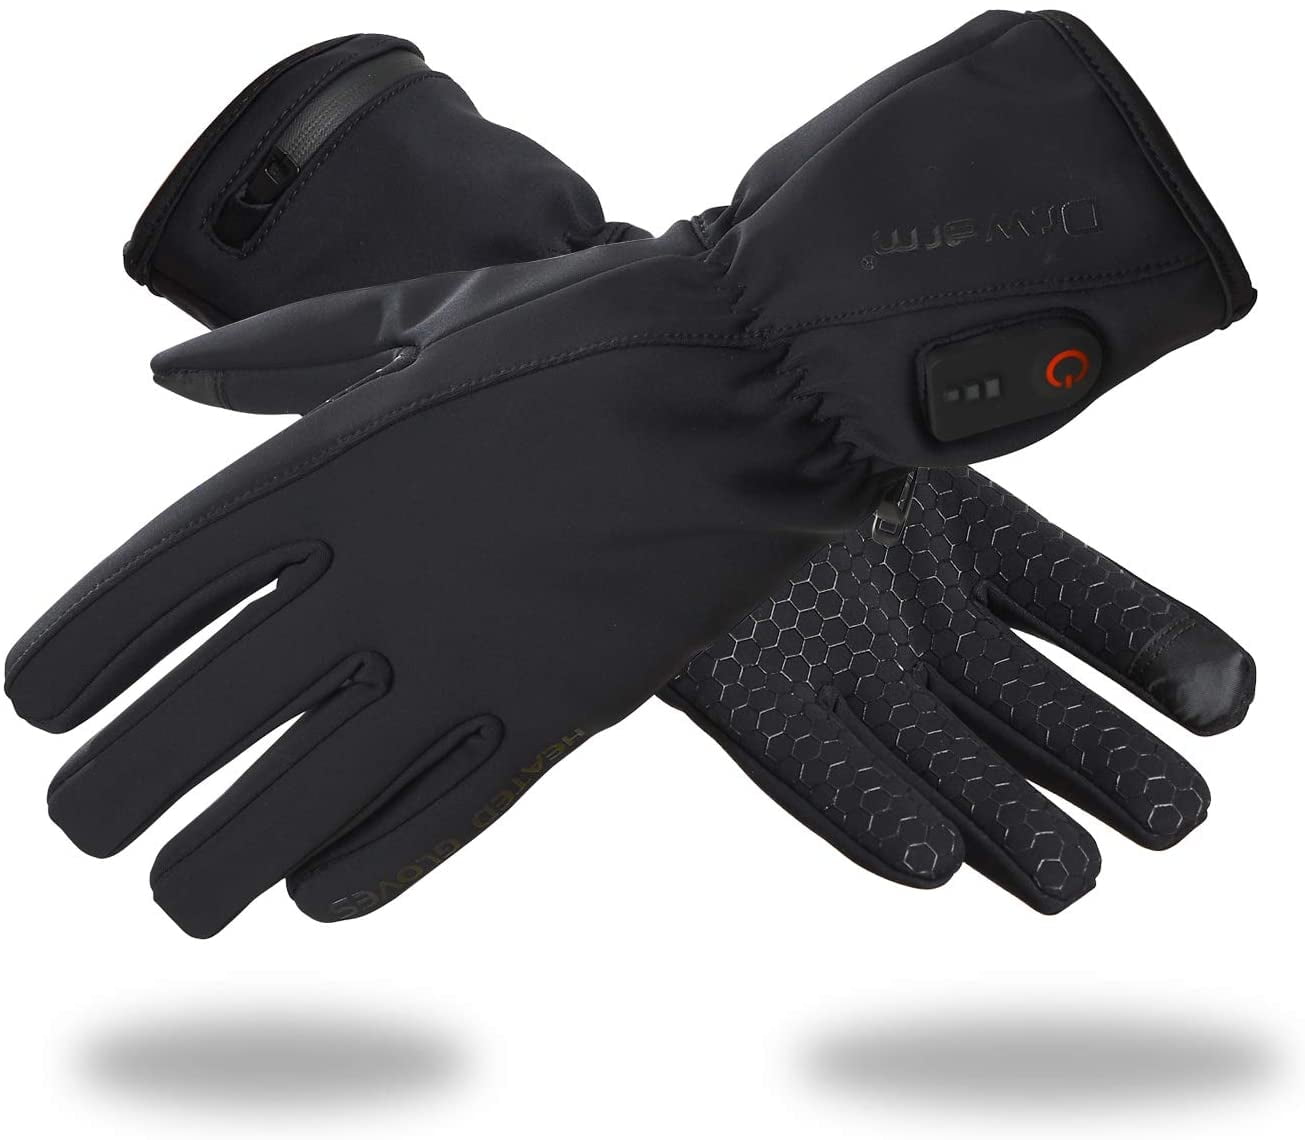 Electric Touch Heated Hands Warmer Gloves 8 Hours Rechargeable Battery Skiing 